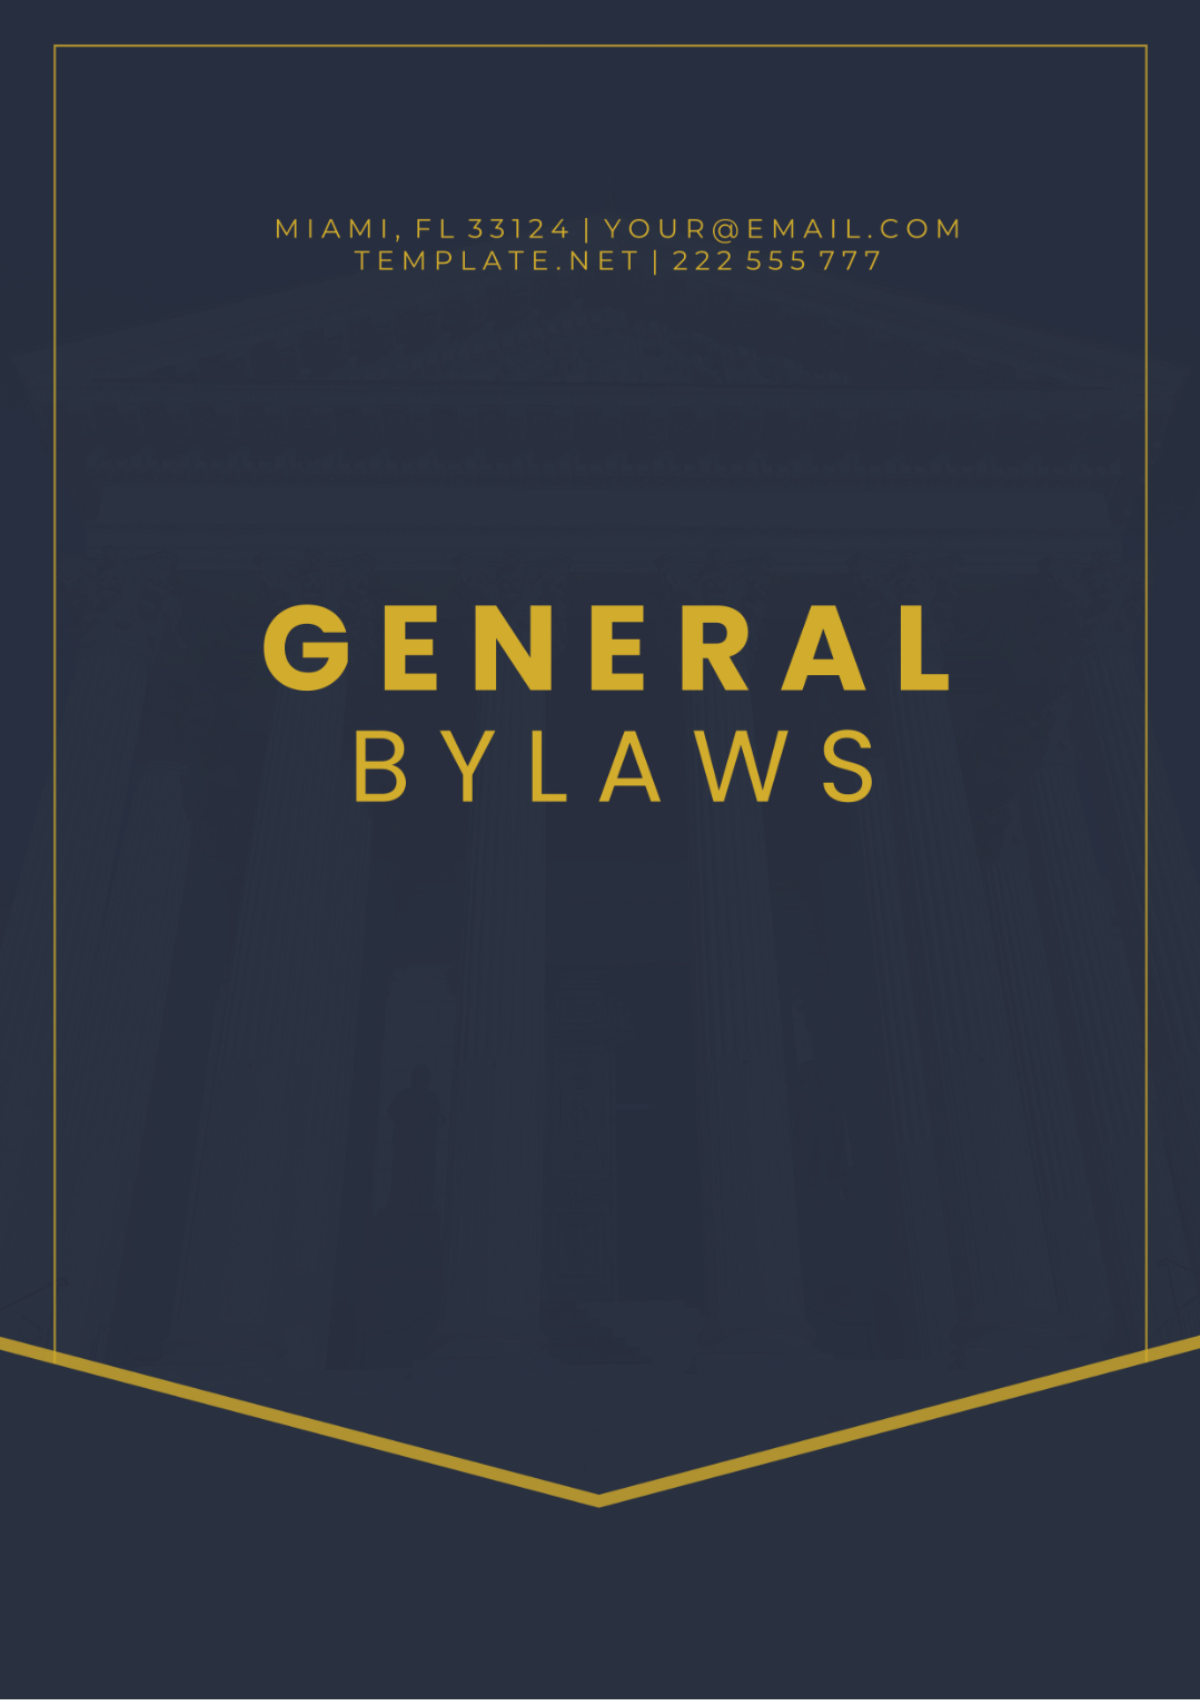 General Bylaws Template